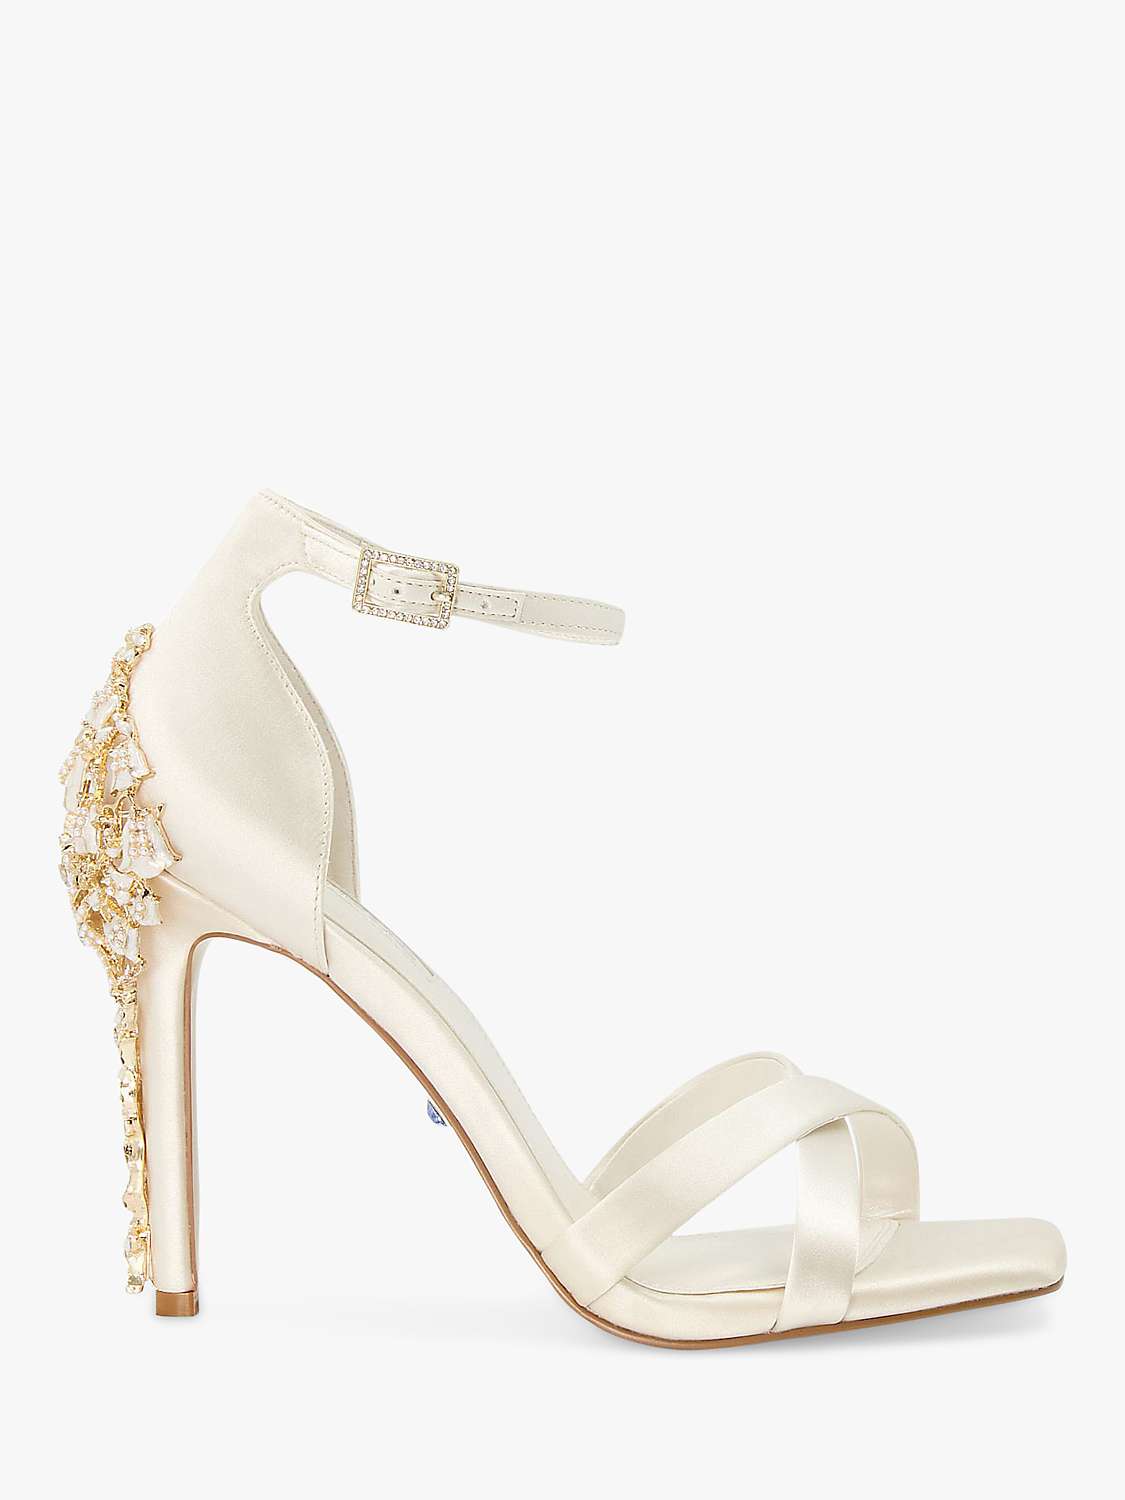 Dune Bridal Collection Marry High Heel Satin Sandals, Ivory at John ...